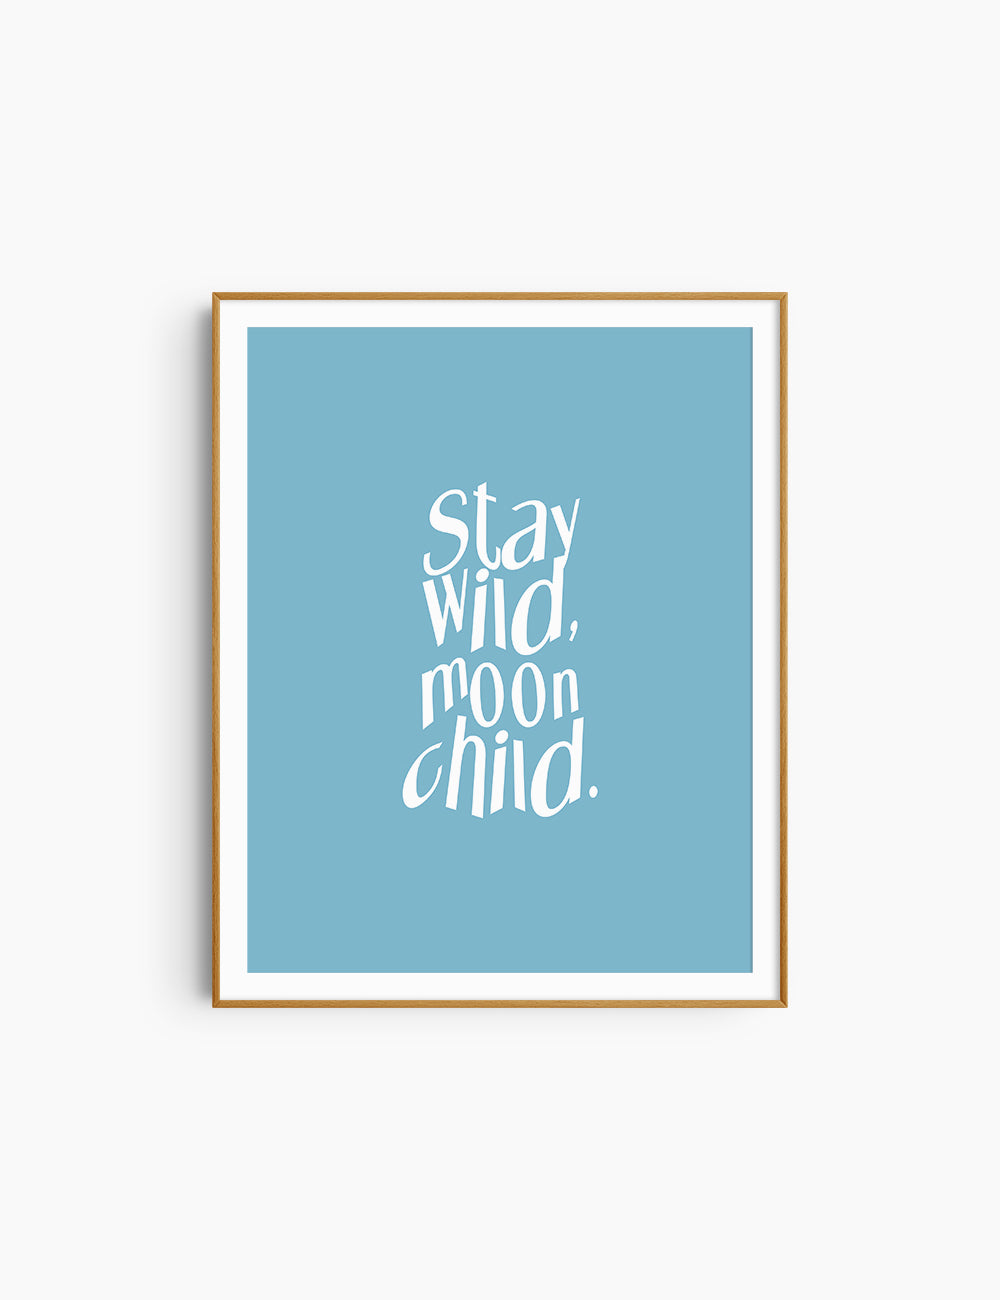 STAY WILD, MOON CHILD. Light Blue and White. Printable Wall Art Quote.